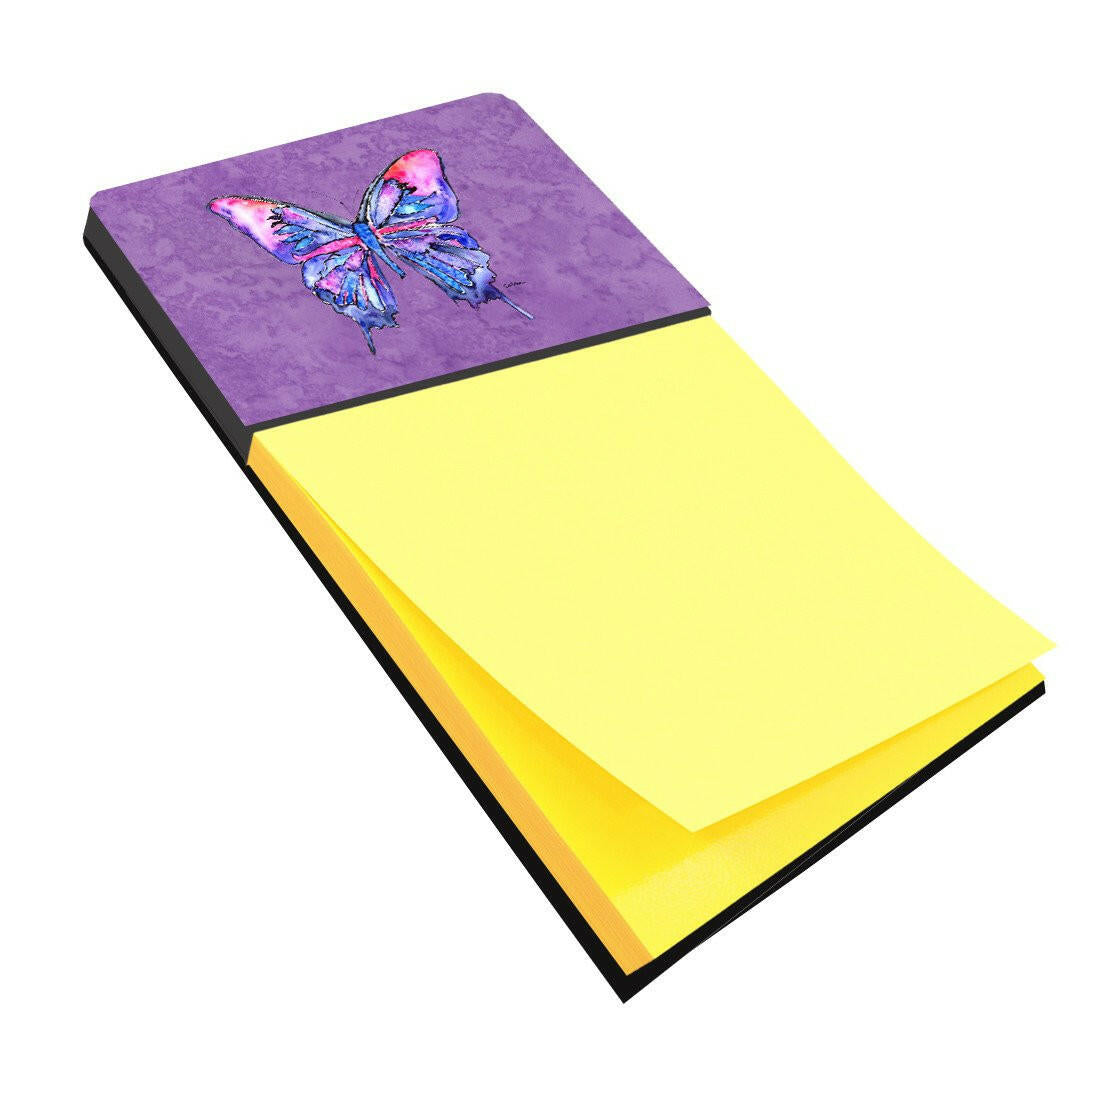 Butterfly on Purple Refiillable Sticky Note Holder or Postit Note Dispenser 8860SN by Caroline's Treasures